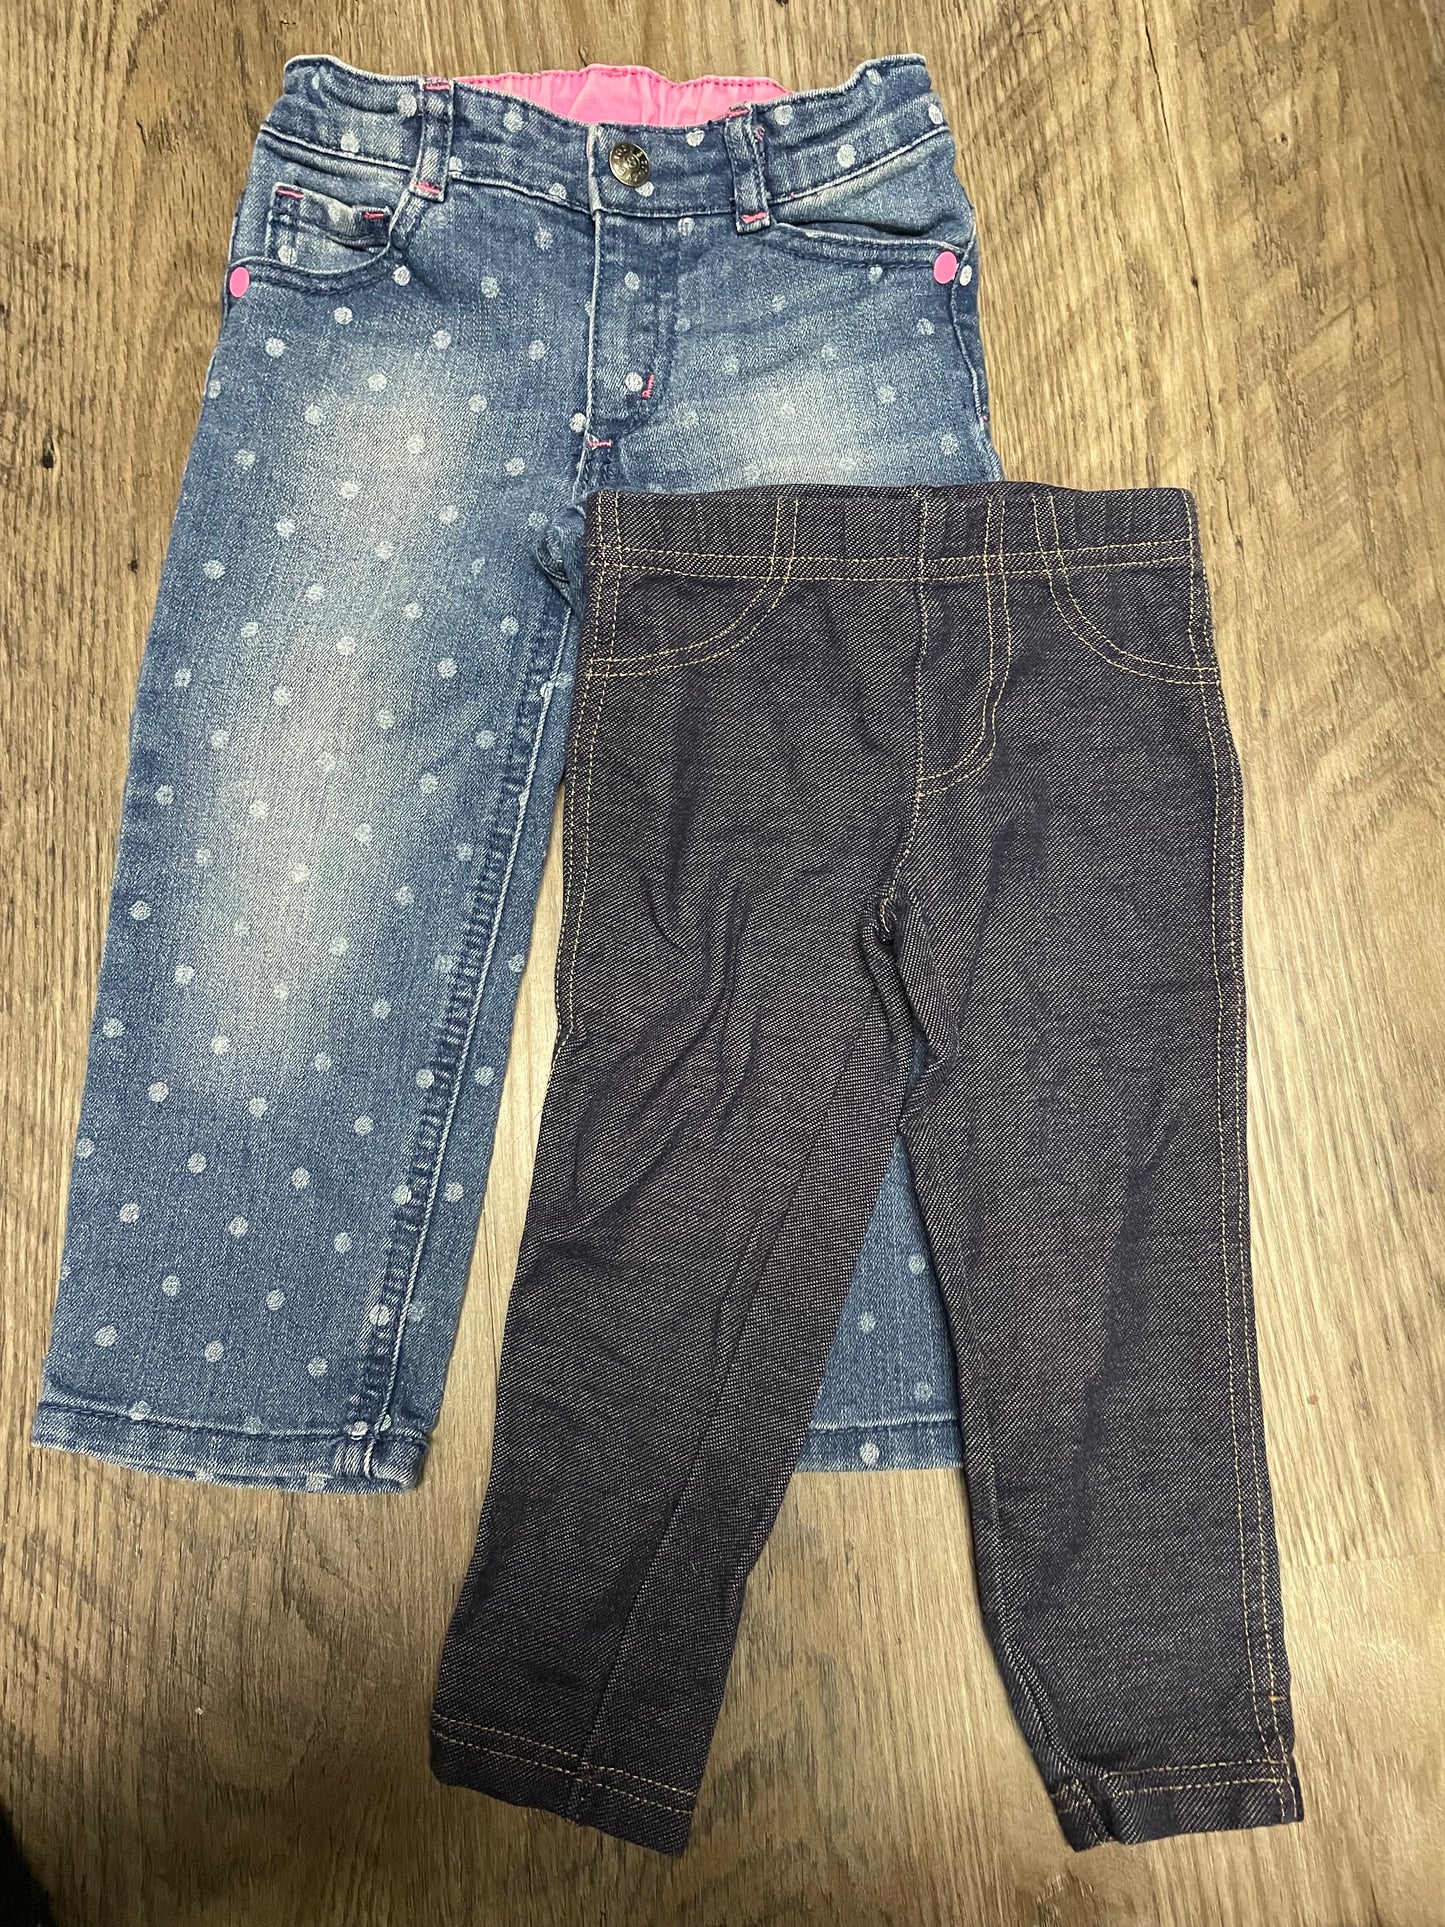 GUC girl 24 Months Jean and leggings. Carters and Crazy 8